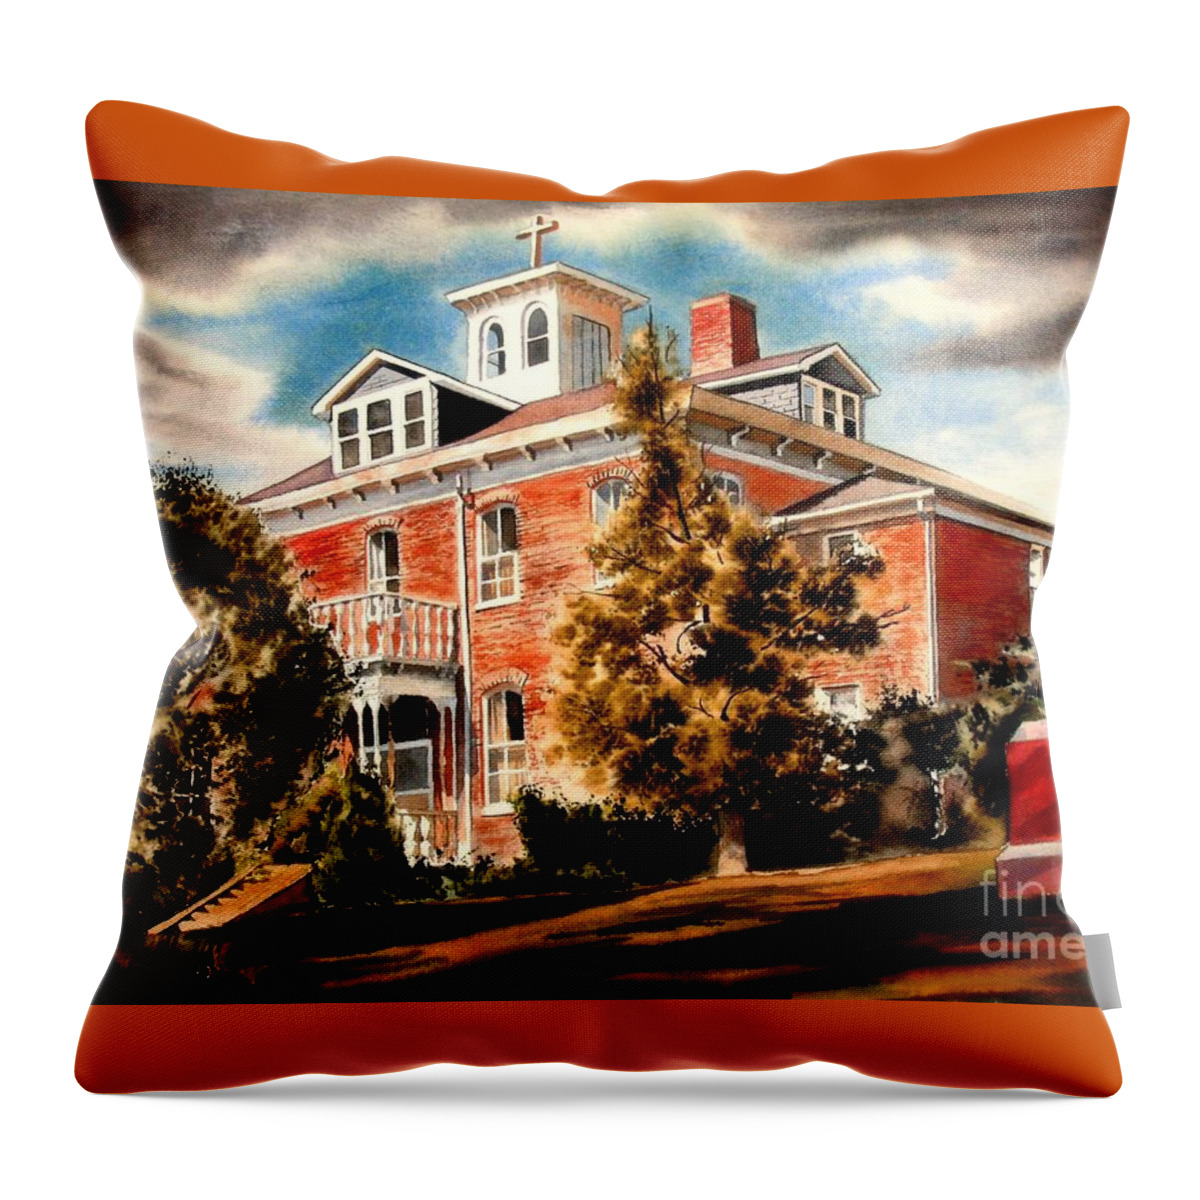 Emerson House Throw Pillow featuring the painting Emerson House by Kip DeVore